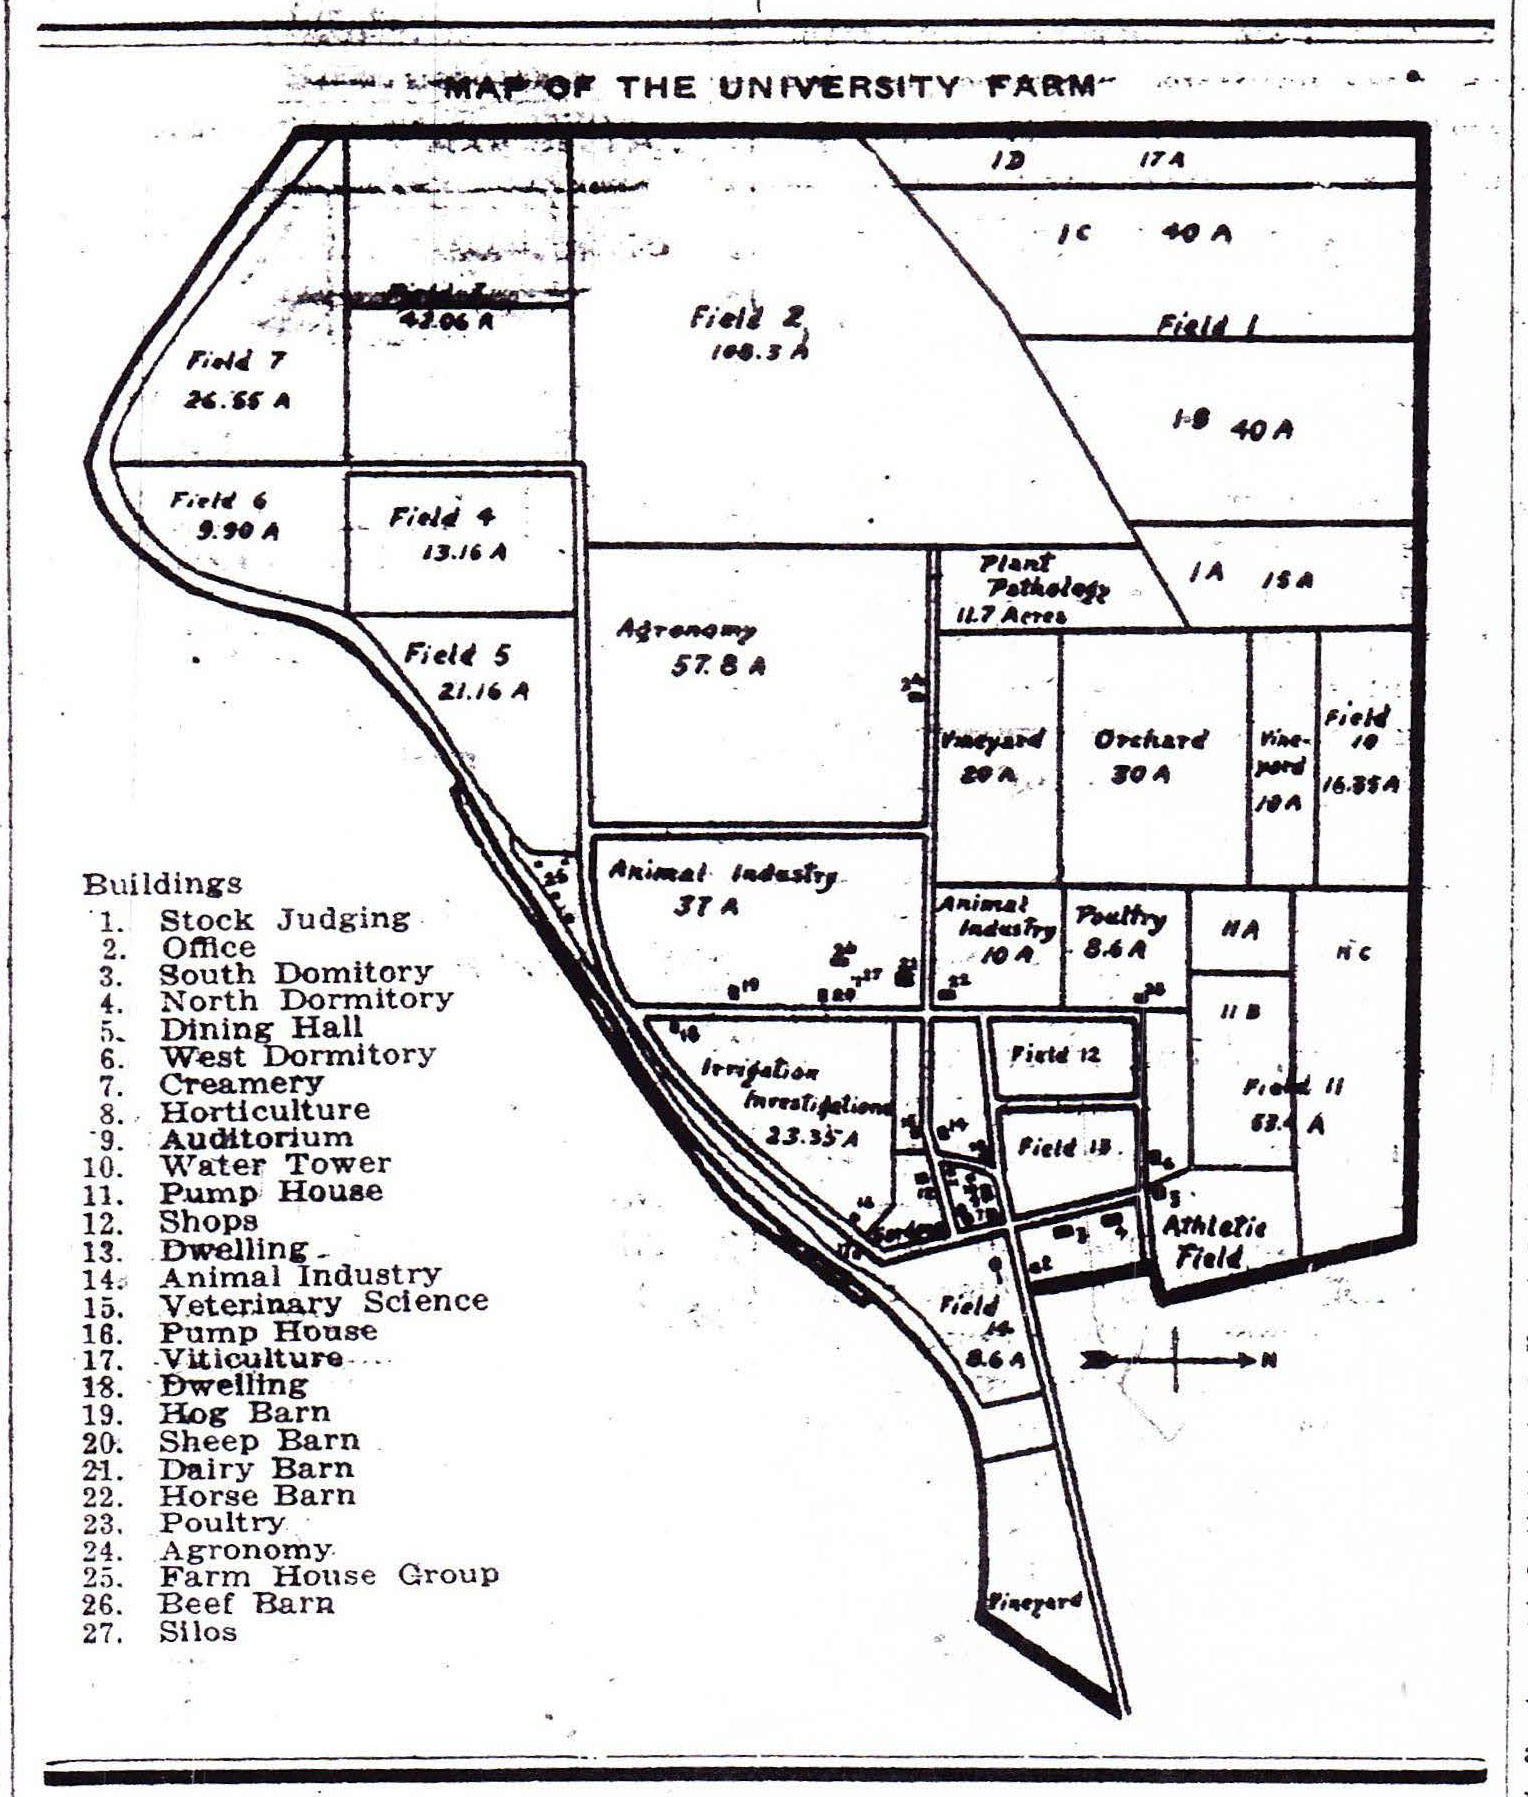 map showing UC Davis with mostly fields and a list of 27 buildings